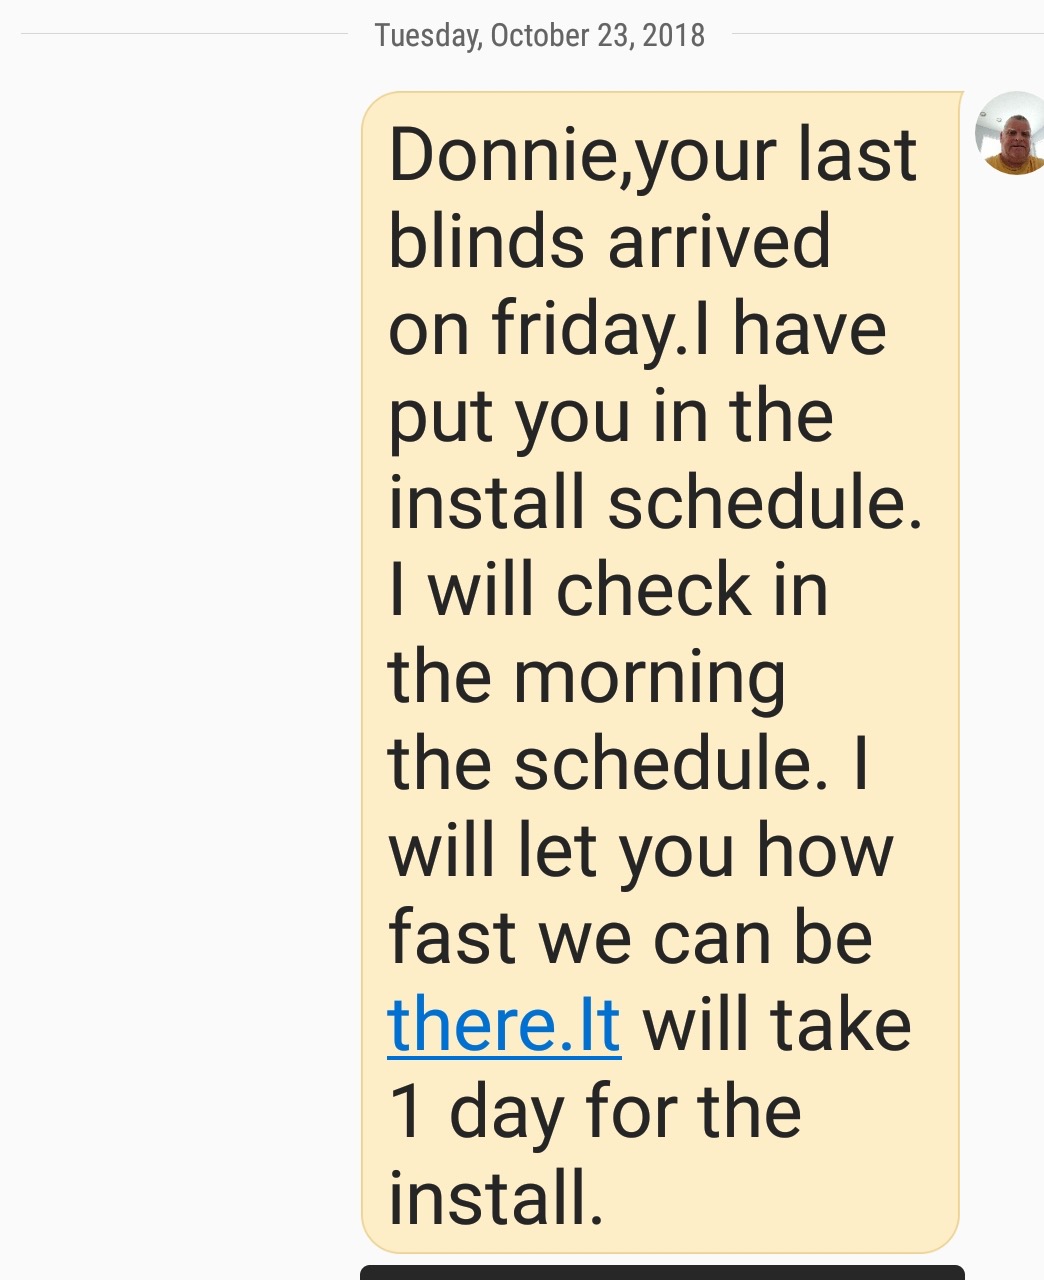 Donnie sent the text